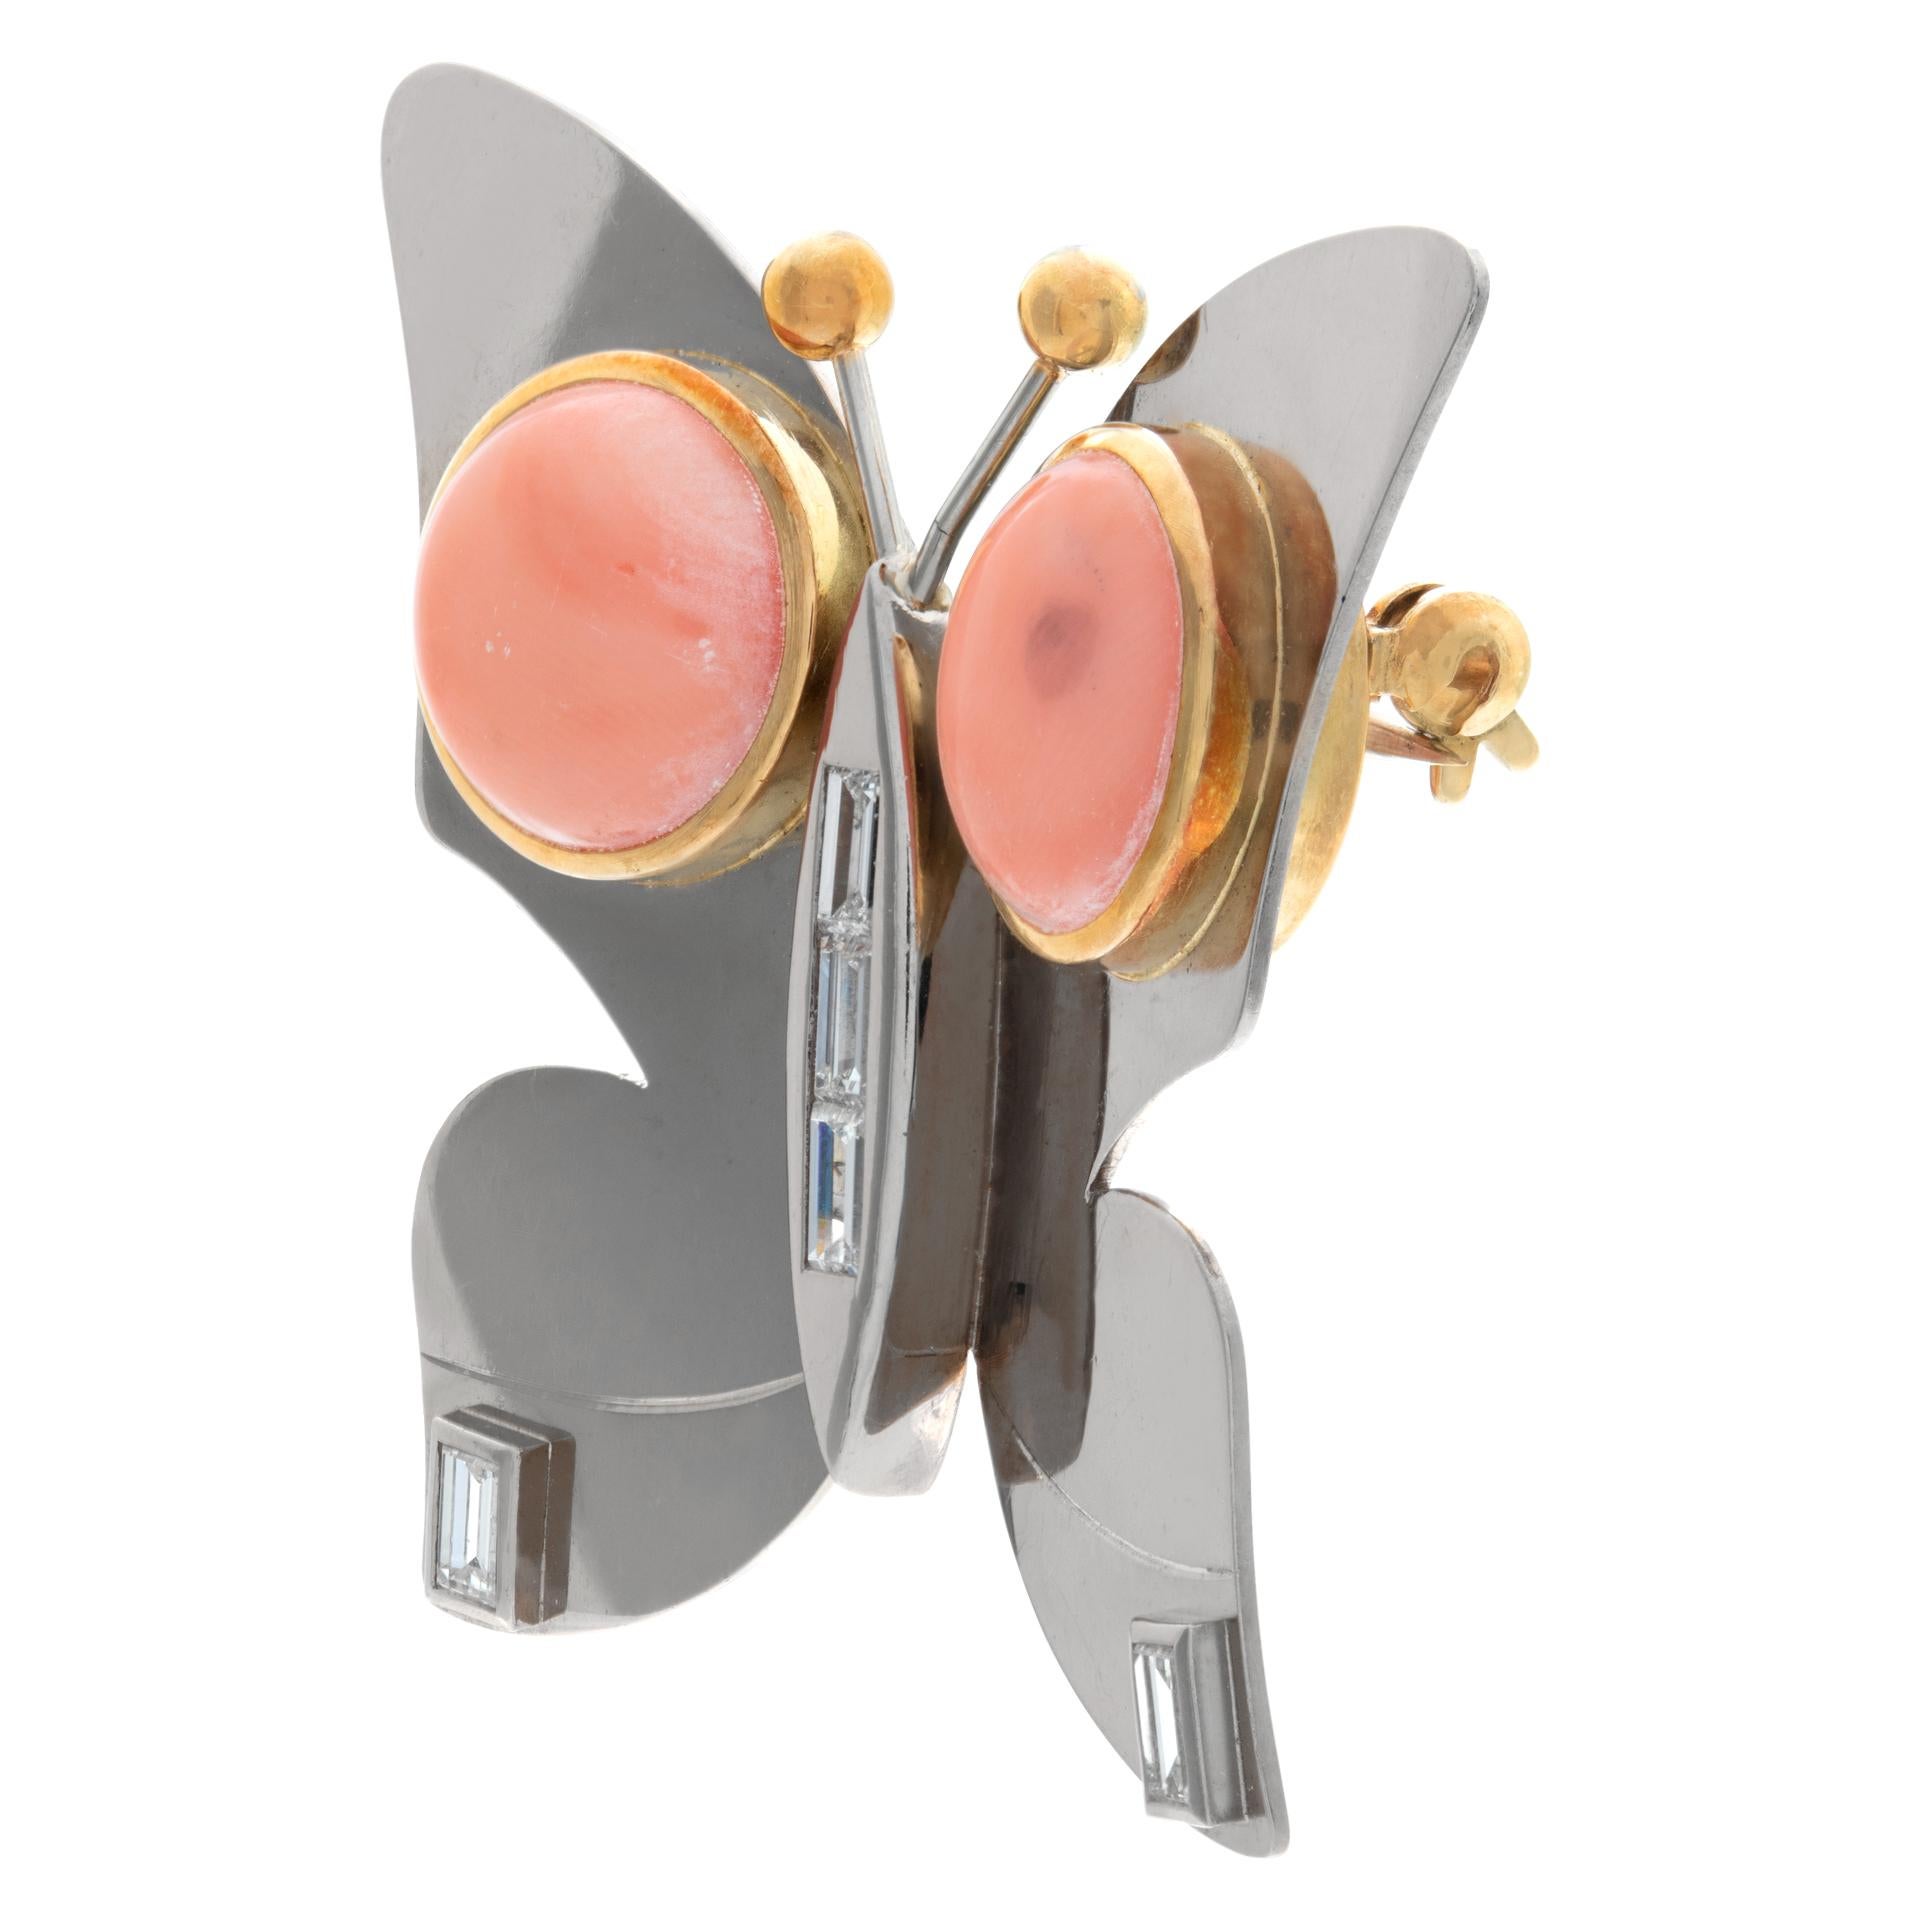 Butterfly brooch with cabochon angel skin coral and baguette diamonds set in 18k white and yellow gold  (approx. 0.75 cts). Measurements 40mm width x 40mm height.